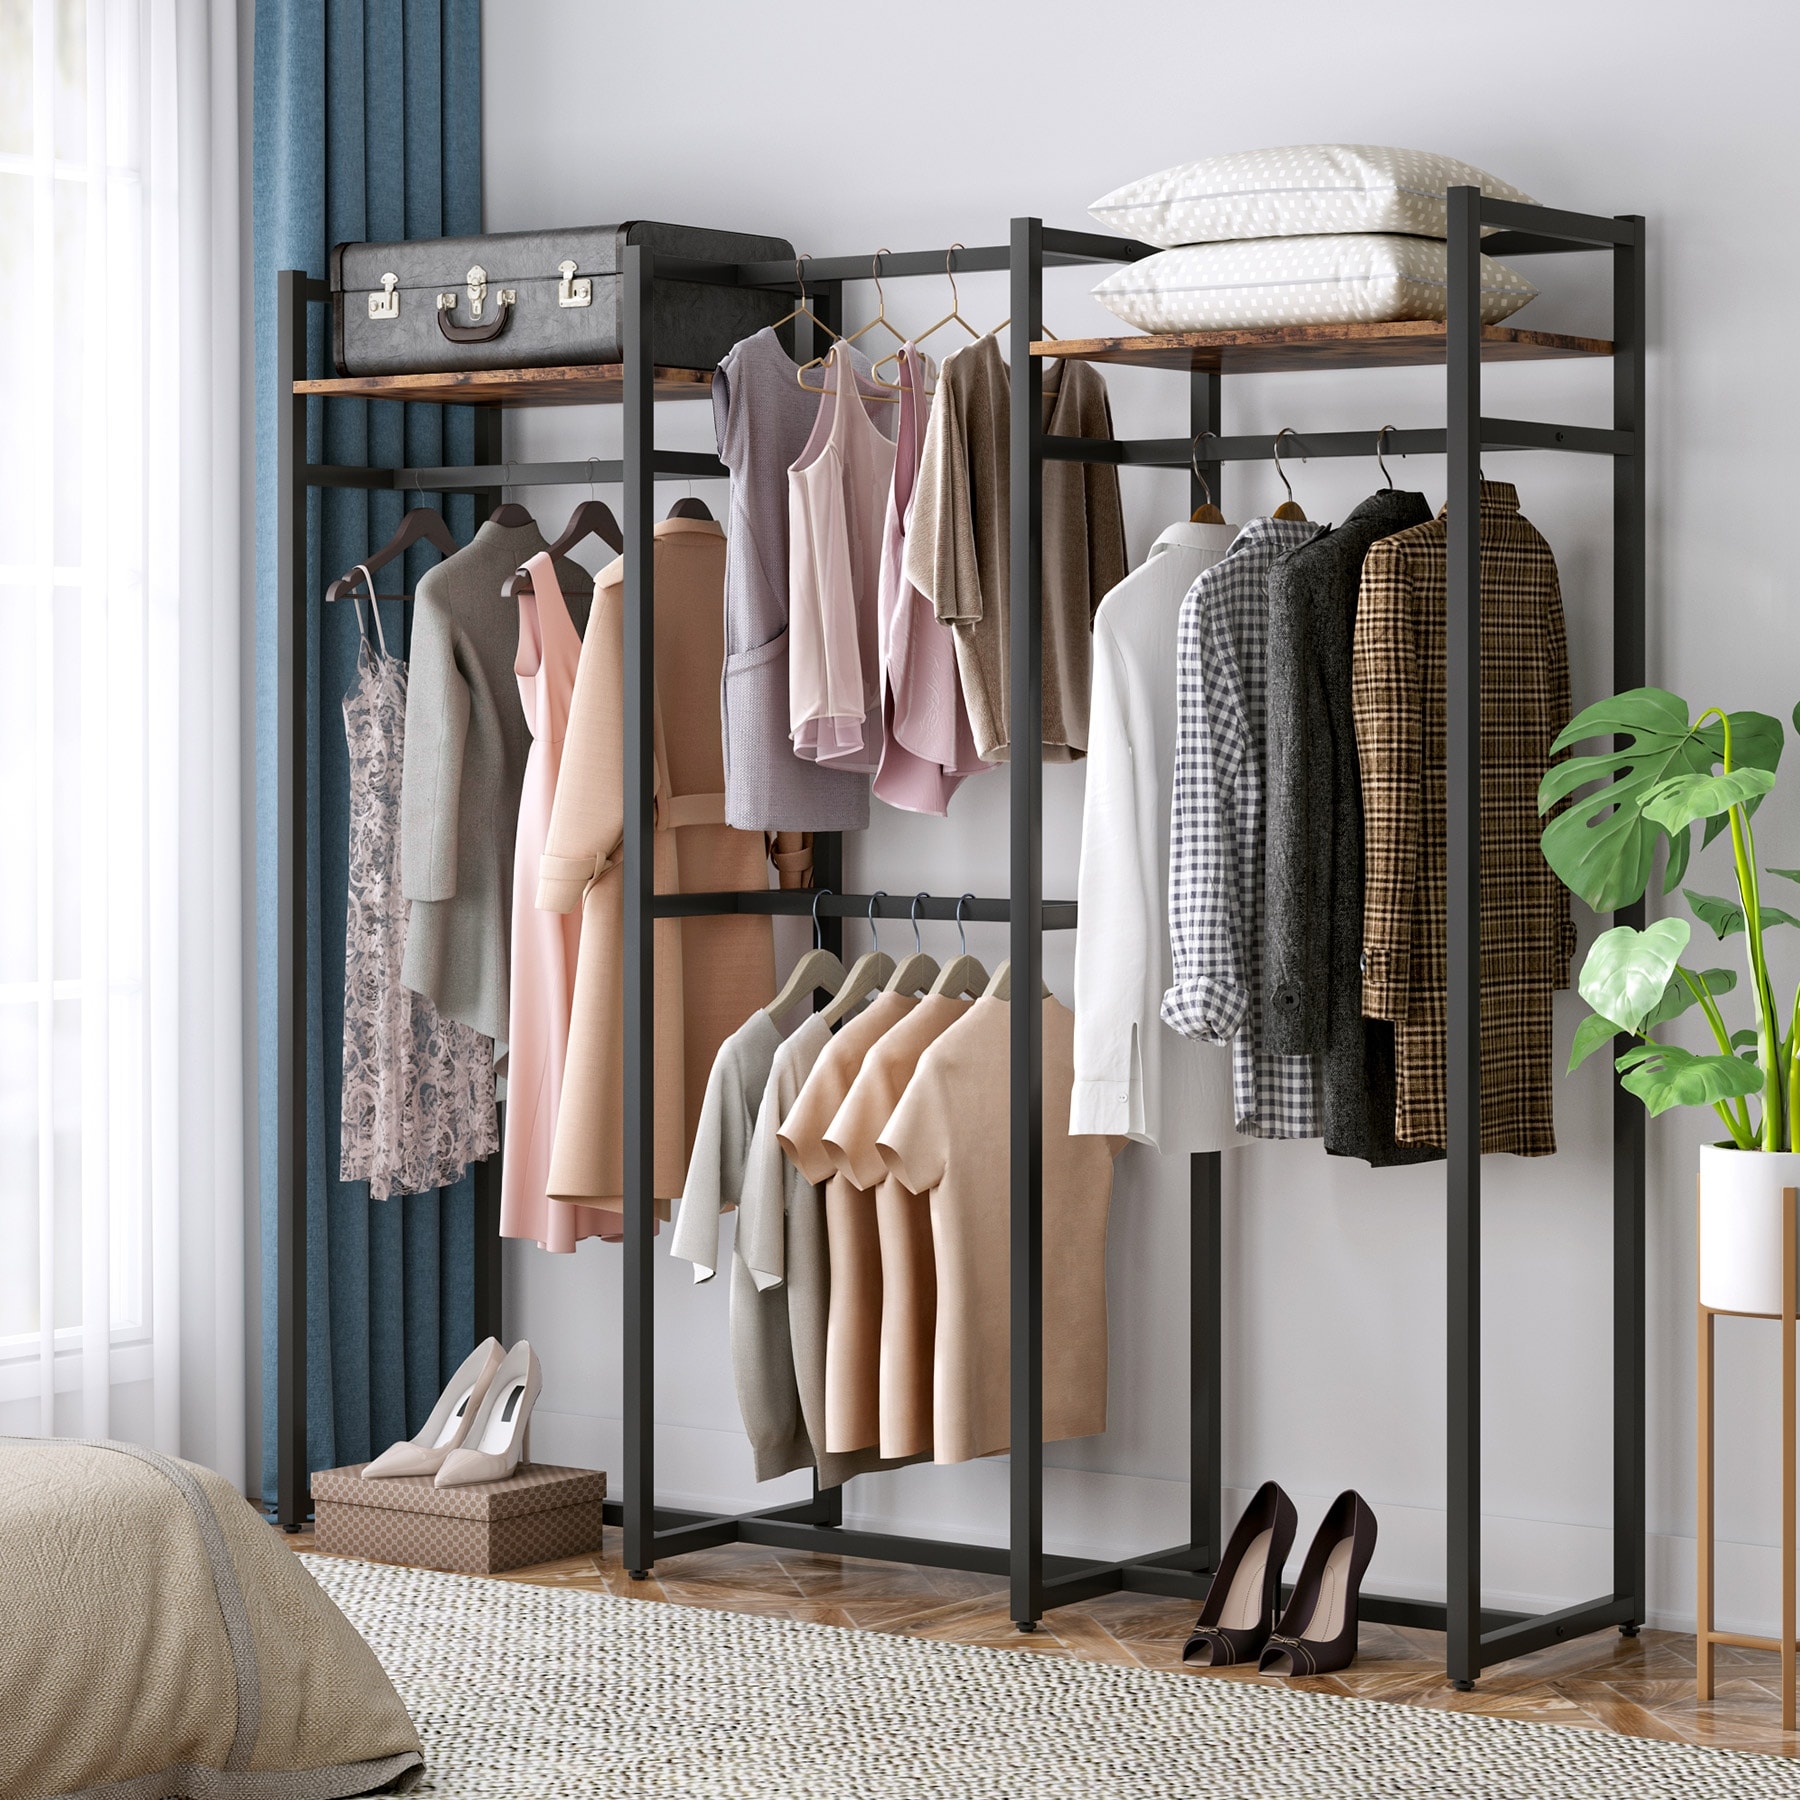 https://ak1.ostkcdn.com/images/products/is/images/direct/f7bb0c1f35b725d5e3e9aba77d6e3df449e836e0/Garment-Rack-Heavy-Duty-Clothes-Rack-Free-Standing-Closet-Organizer-with-Shelves-and-4-hanging-Rods.jpg